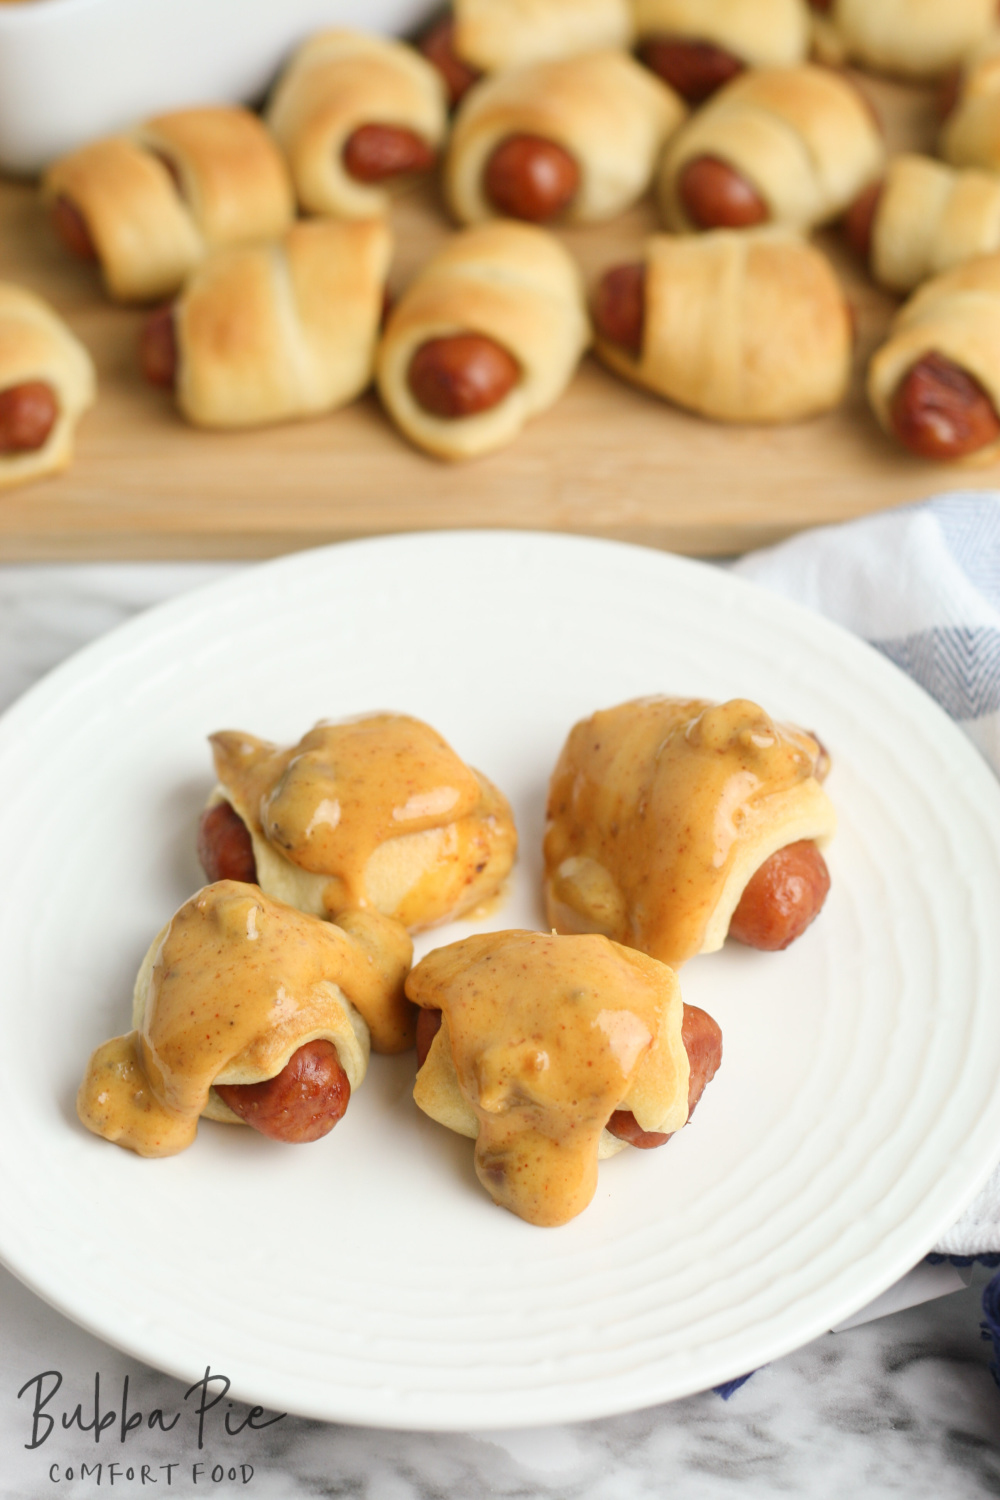 this mini pigs in a blanket with chili cheese sauce recipe is so easy to make with your slow cooker or crock pot!